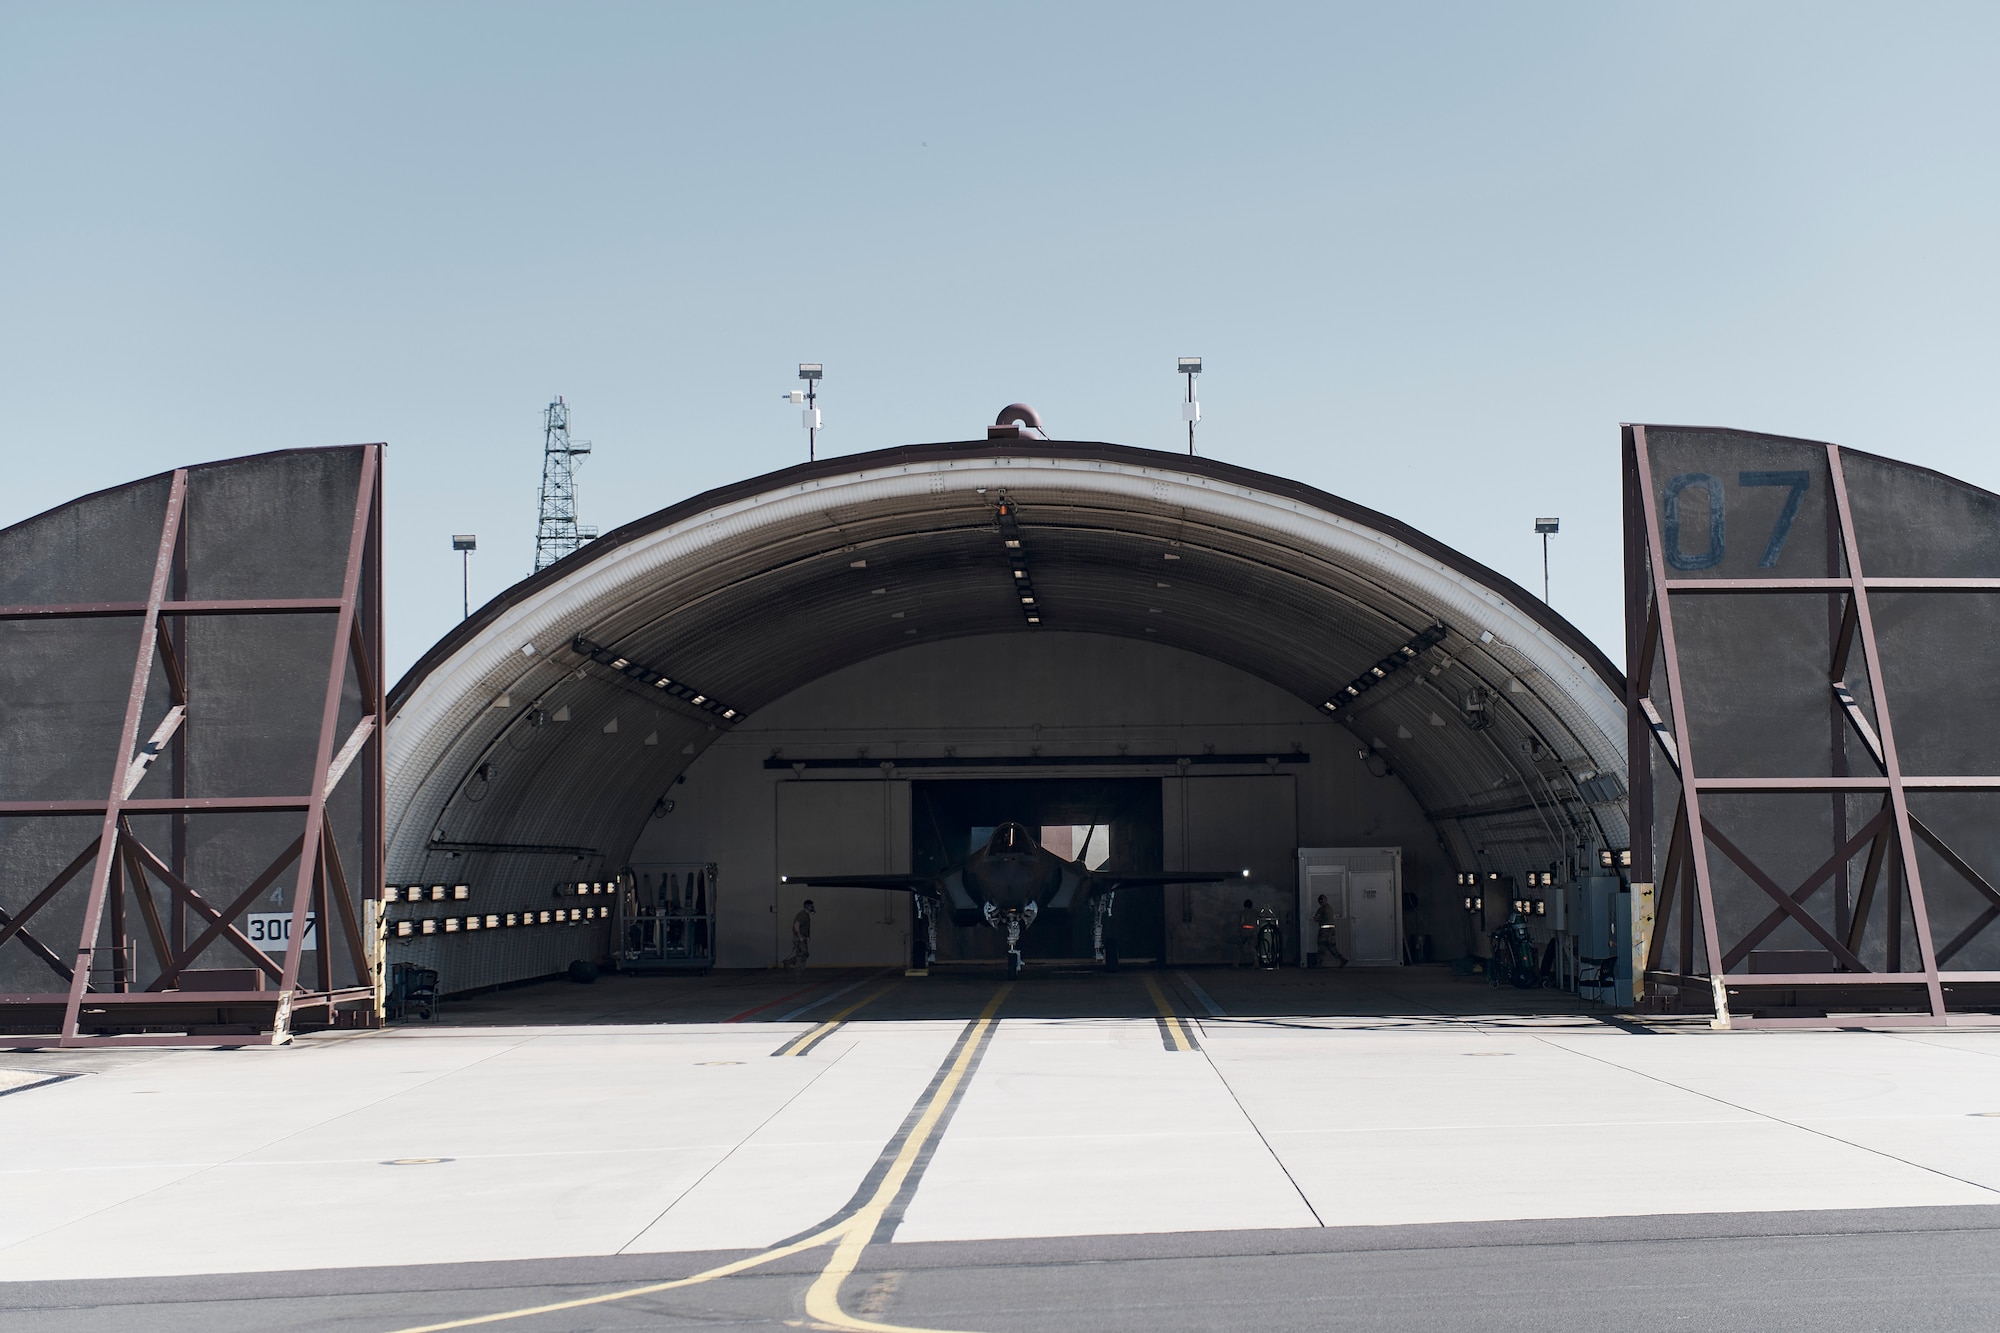 Photos of Airmen and F-35 aircraft assigned to the 158th Fighter Wing on the flight line at Spangdahlem Air Base in Germany, June 21, 2022. Aircraft and Airmen from Vermont's 158th Fighter Wing deployed to Germany for more than three months as part of ongoing NATO efforts in Europe.